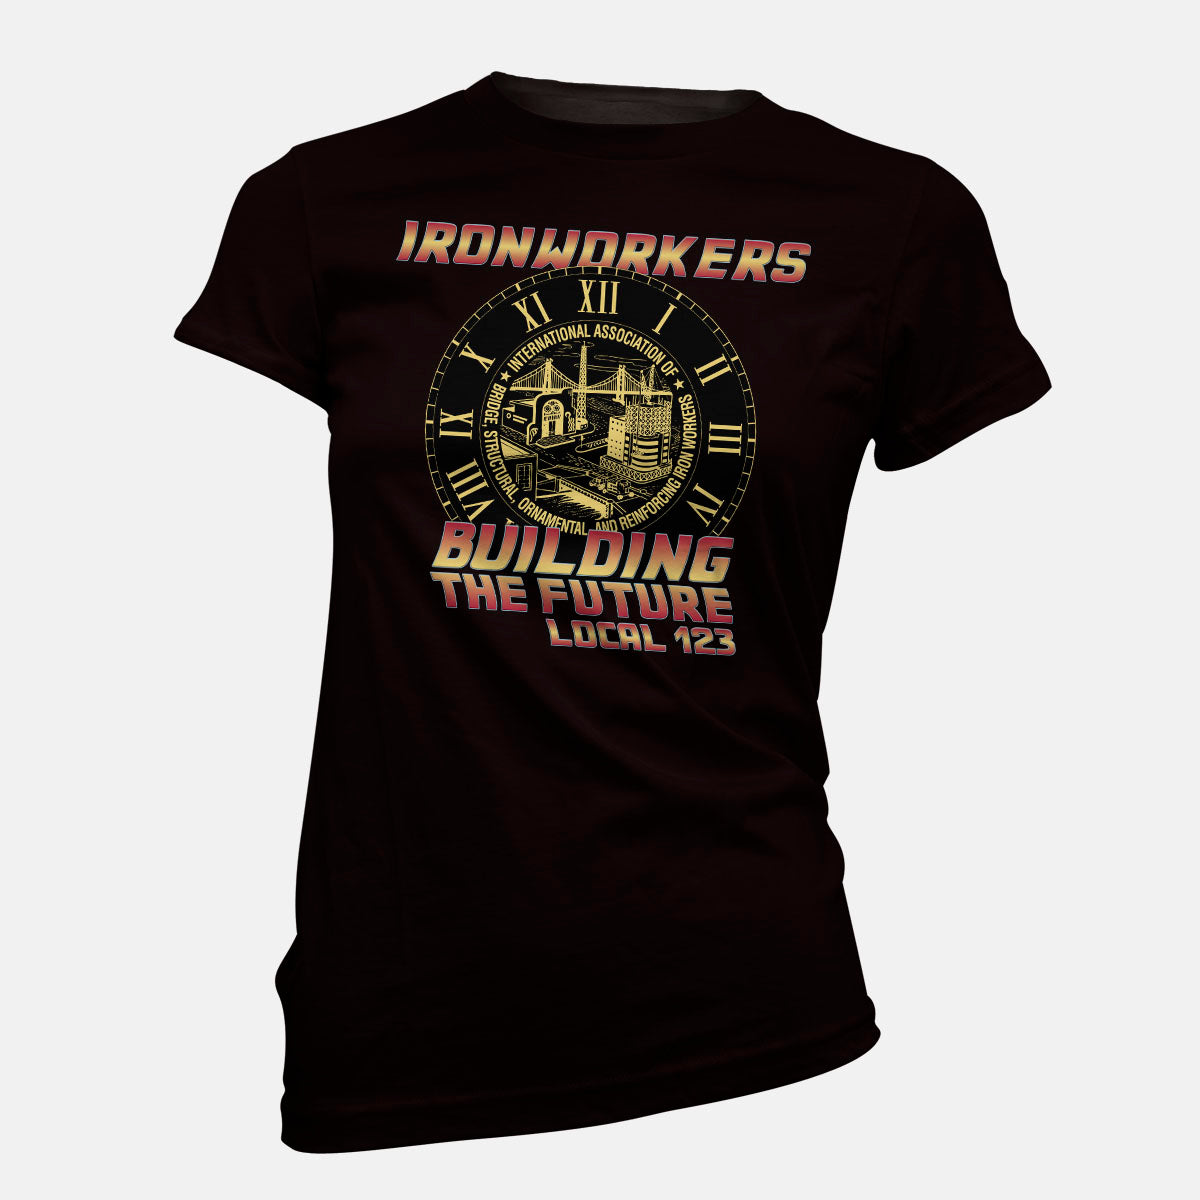 Ironworkers Future Union Apparel